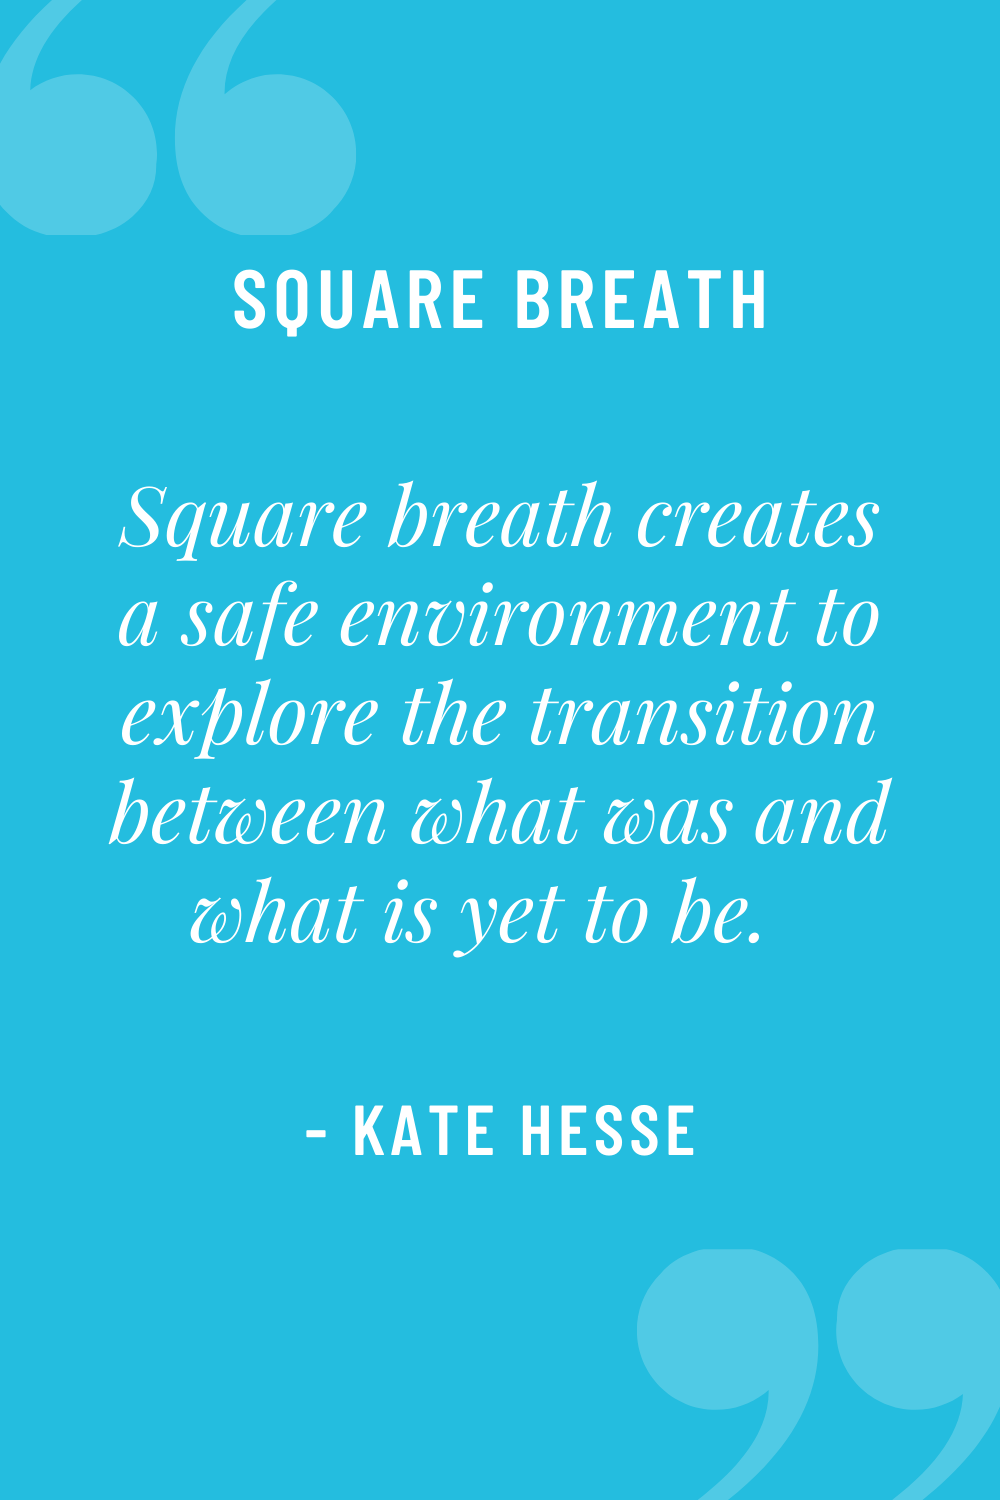 Square breath creates a safe environment to explore the transition between what was and what is yet to be.